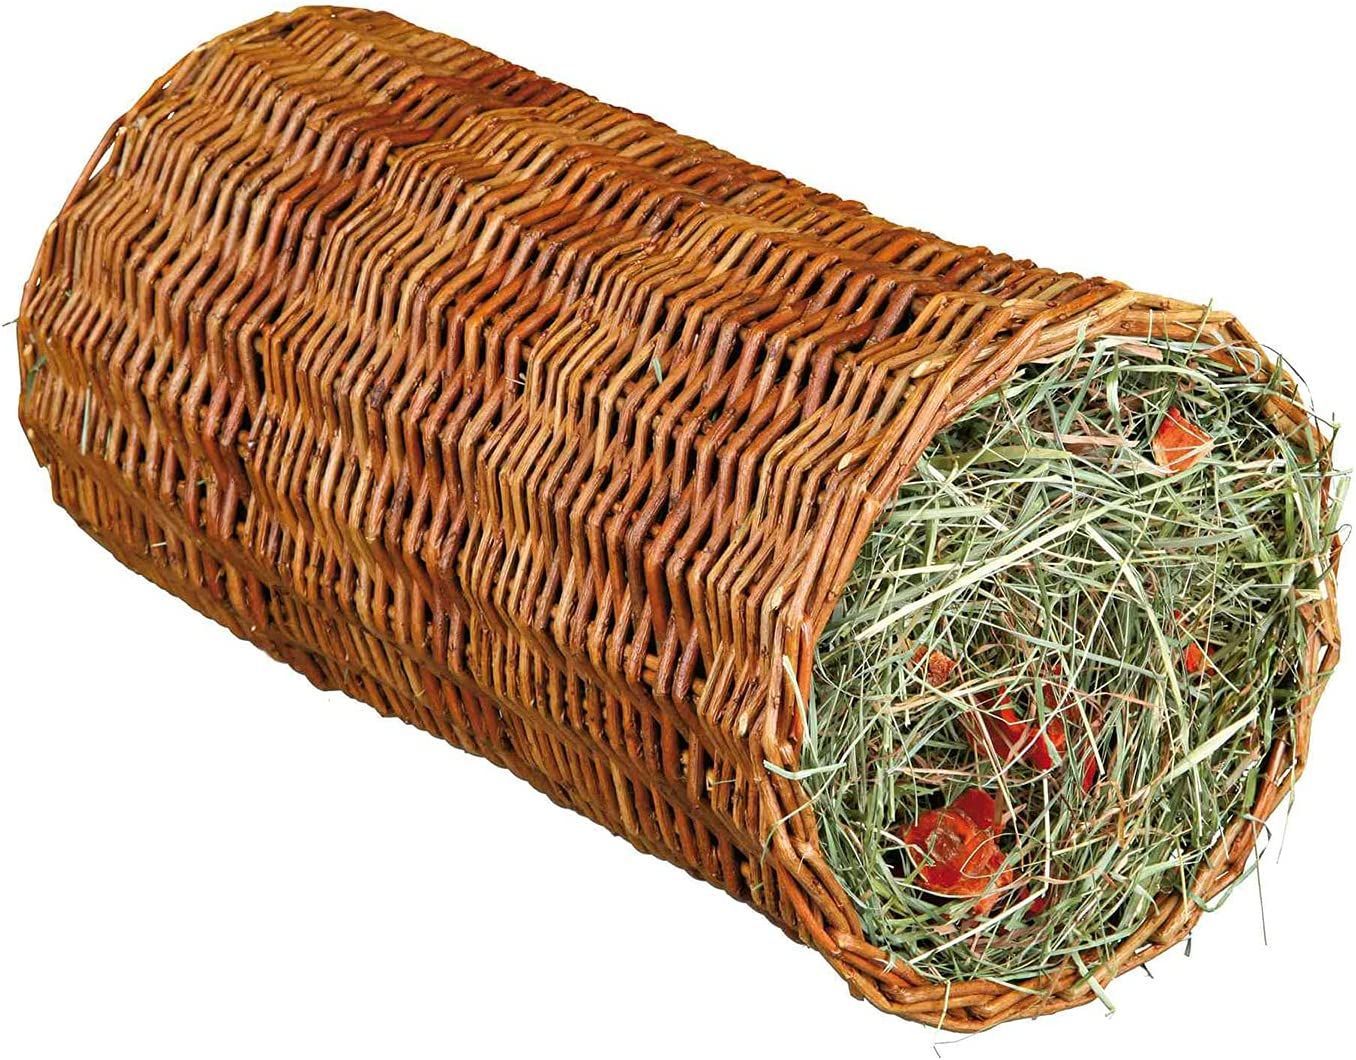 Wicker Tunnel with hay: